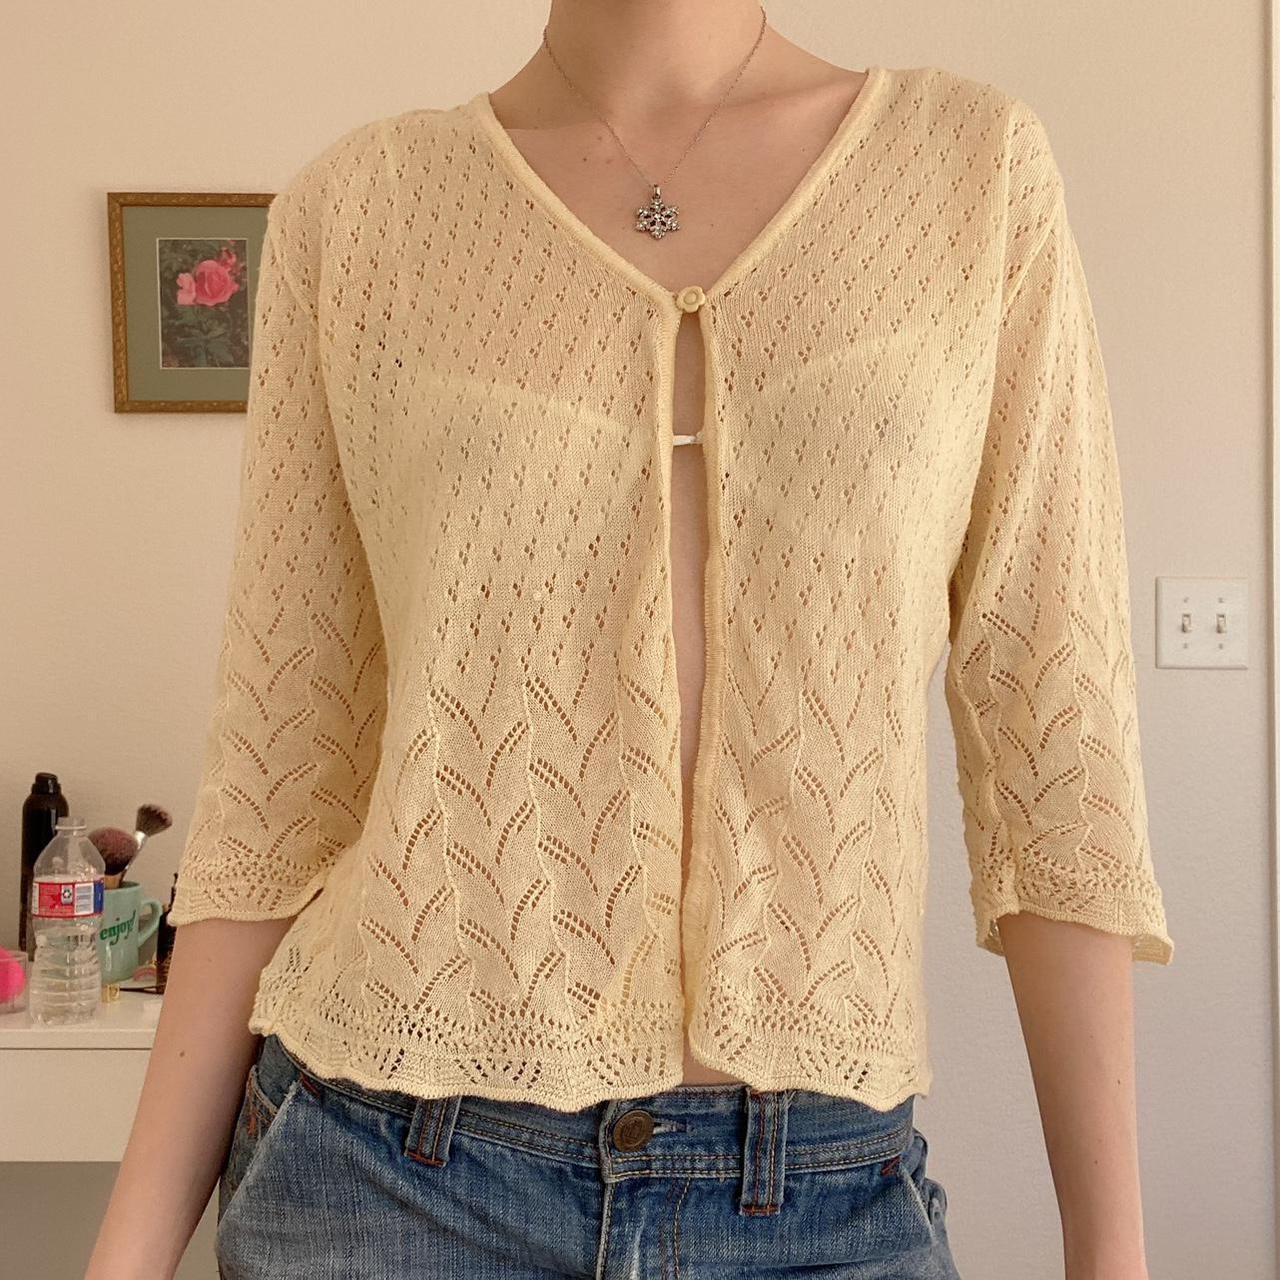 Product Image 1 - Cutest vintage pastel yellow knit